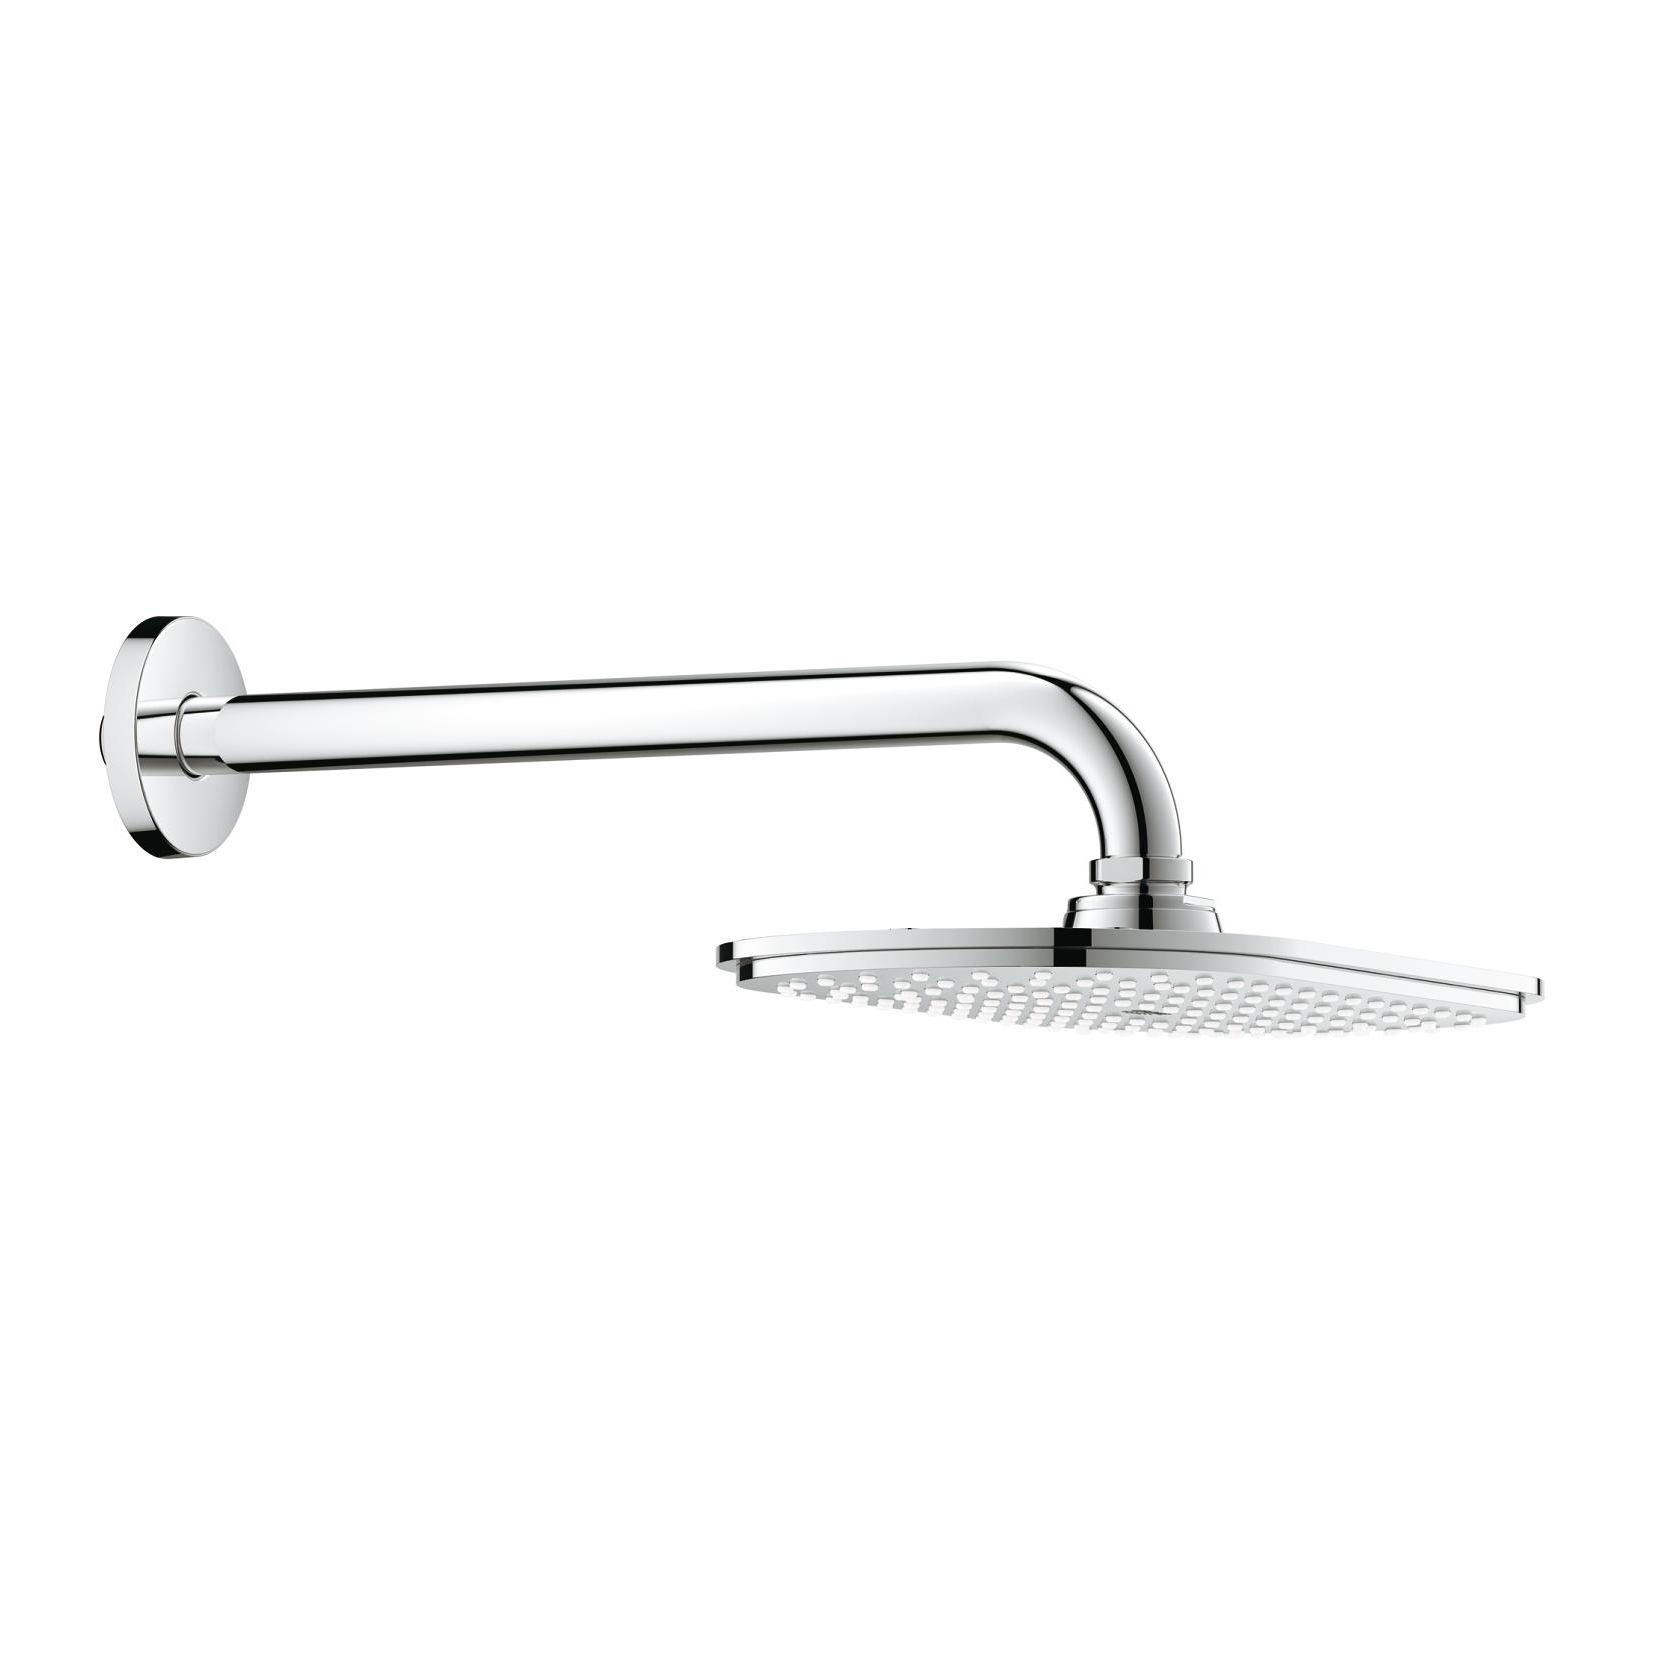 Details about   Very flat 300mm shower head rain shower head with 132 anitkalk incl nozzles show original title 